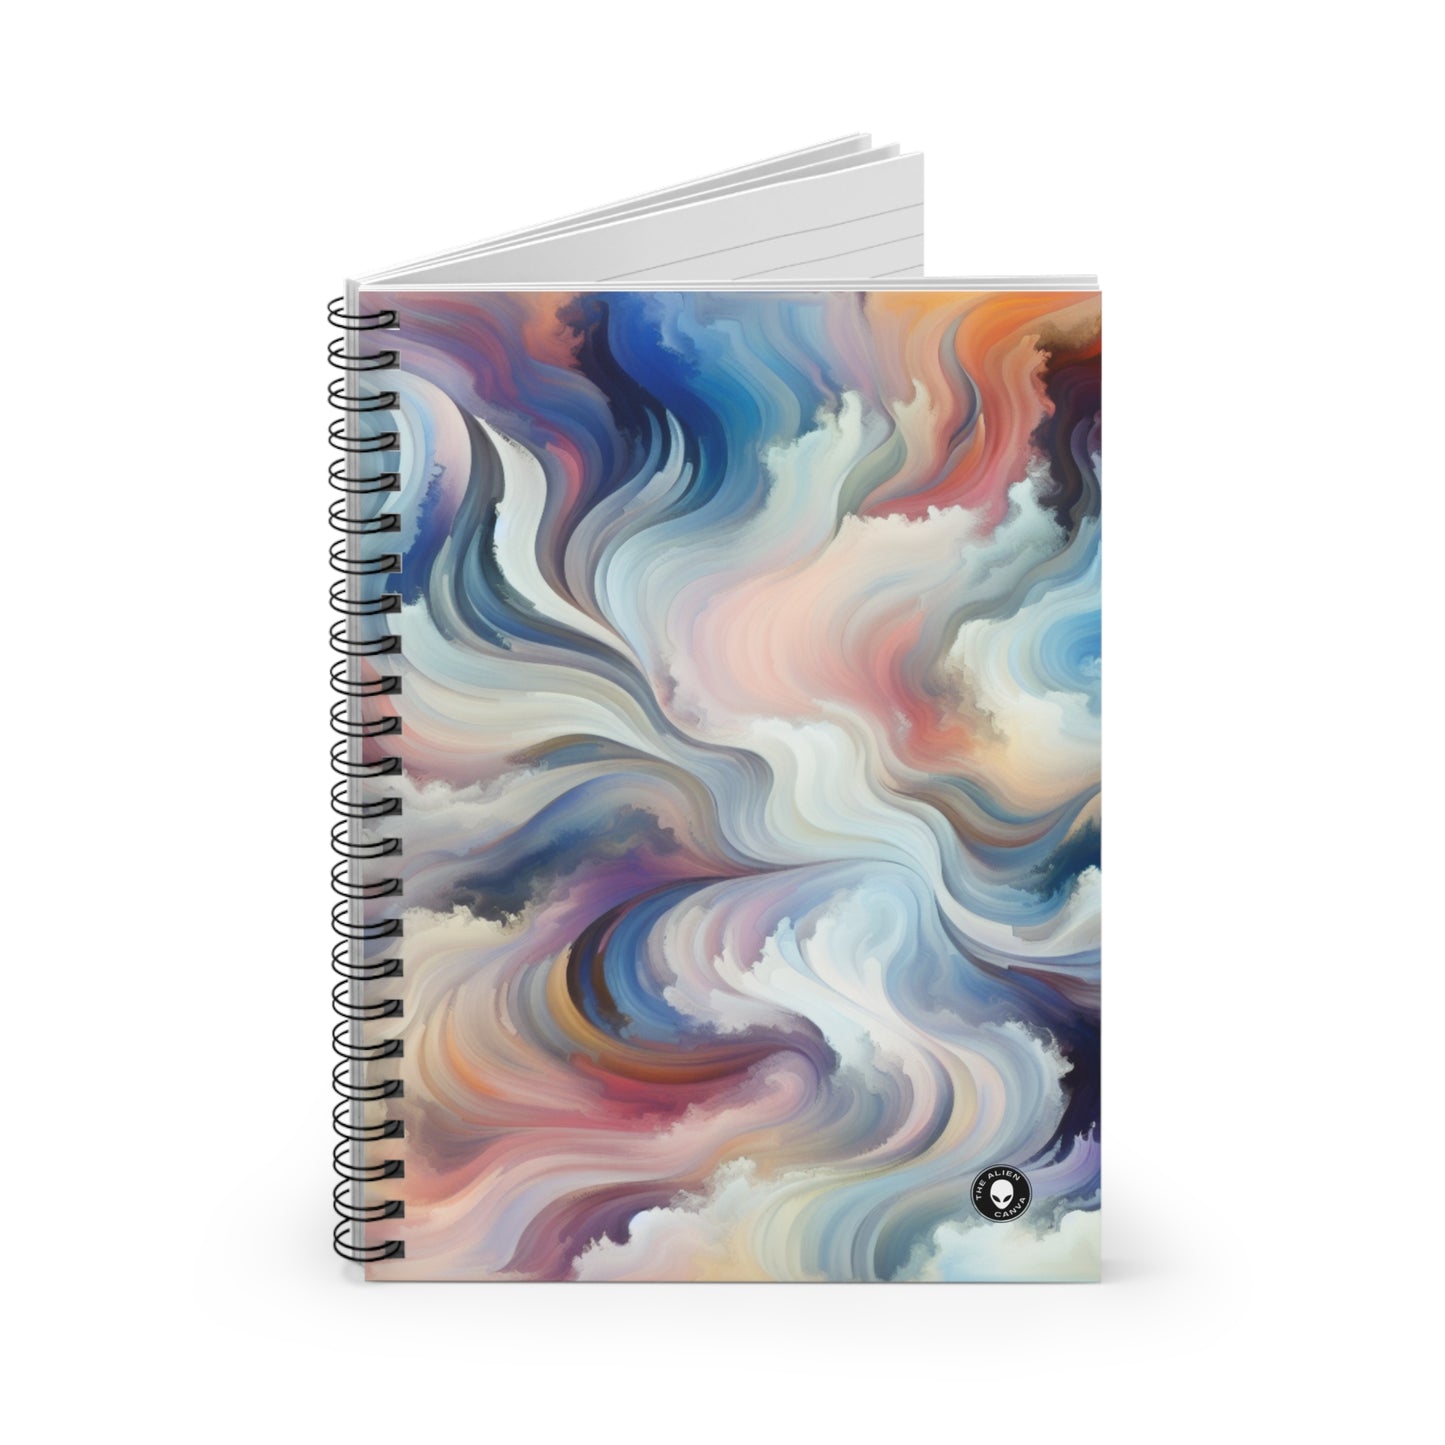 "Harmonie dans la nature : une abstraction lyrique" - The Alien Spiral Notebook (Ruled Line) Lyrical Abstraction